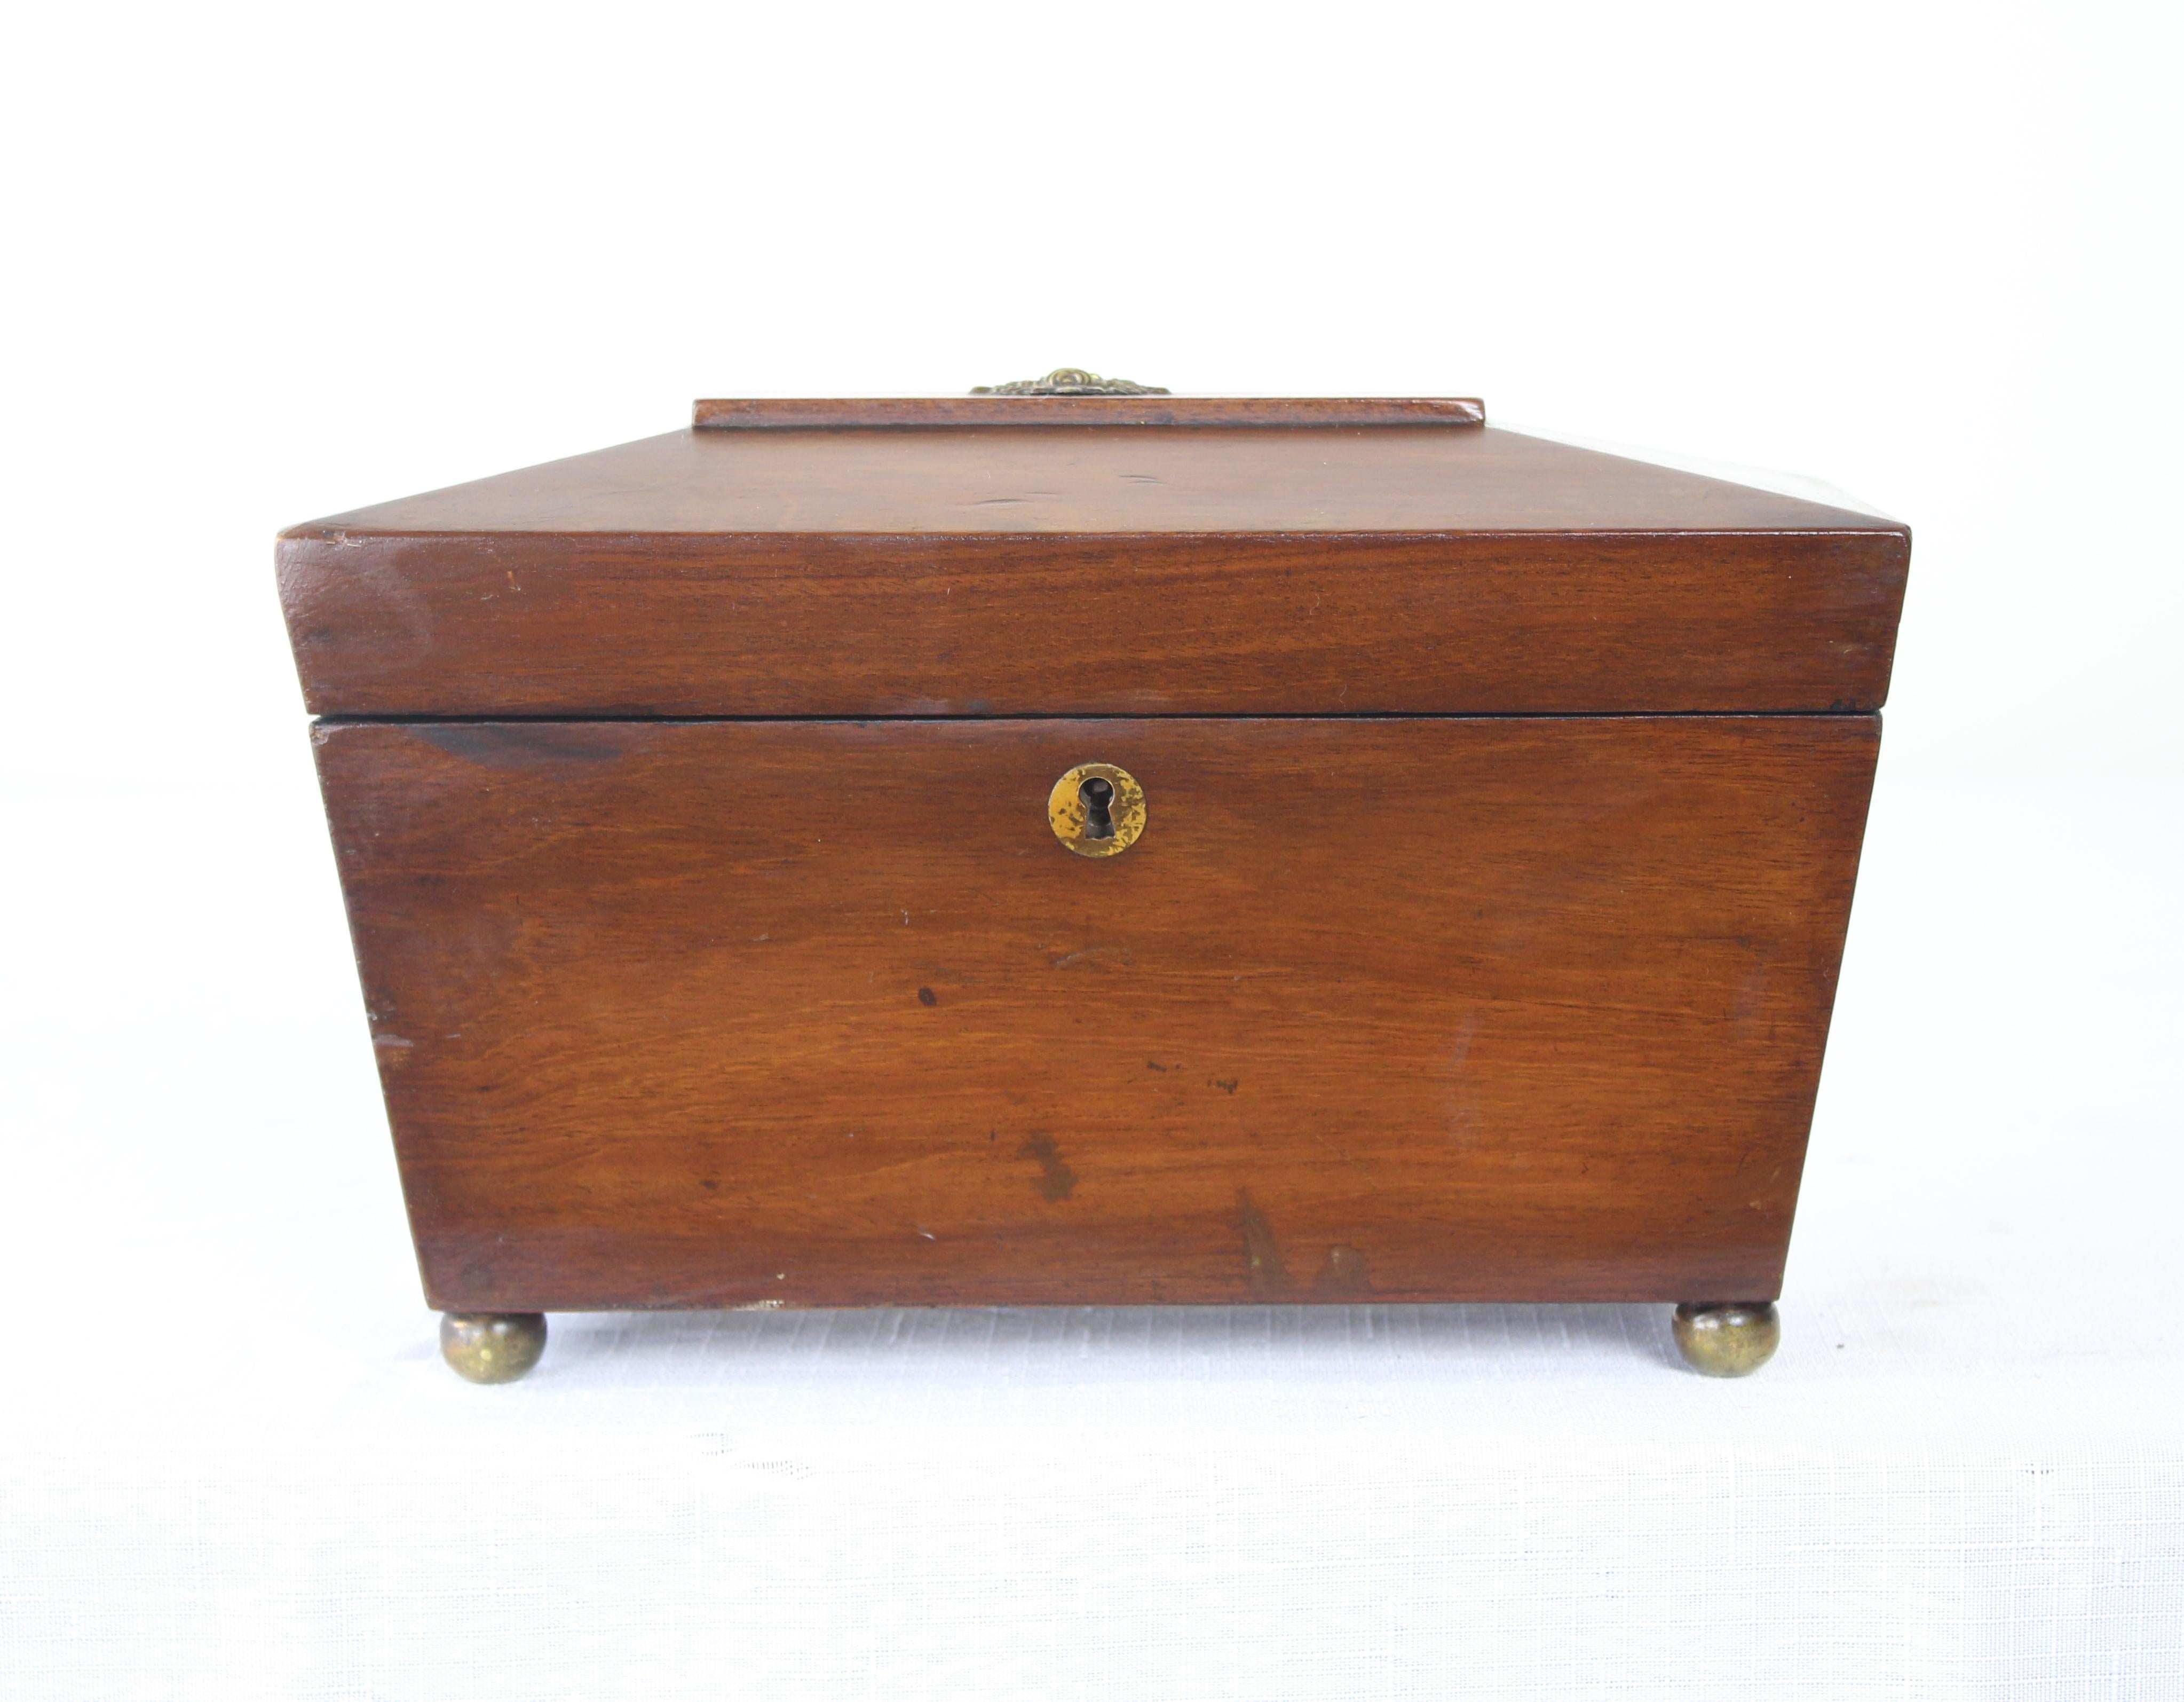 A splendid sarcophagus shaped walnut tea caddy on charming bun feet, circa 1820. Good color and patina and in very nice antique condition. The decorative brass piece at the top has a small area of damage. Original paper lining. No key.